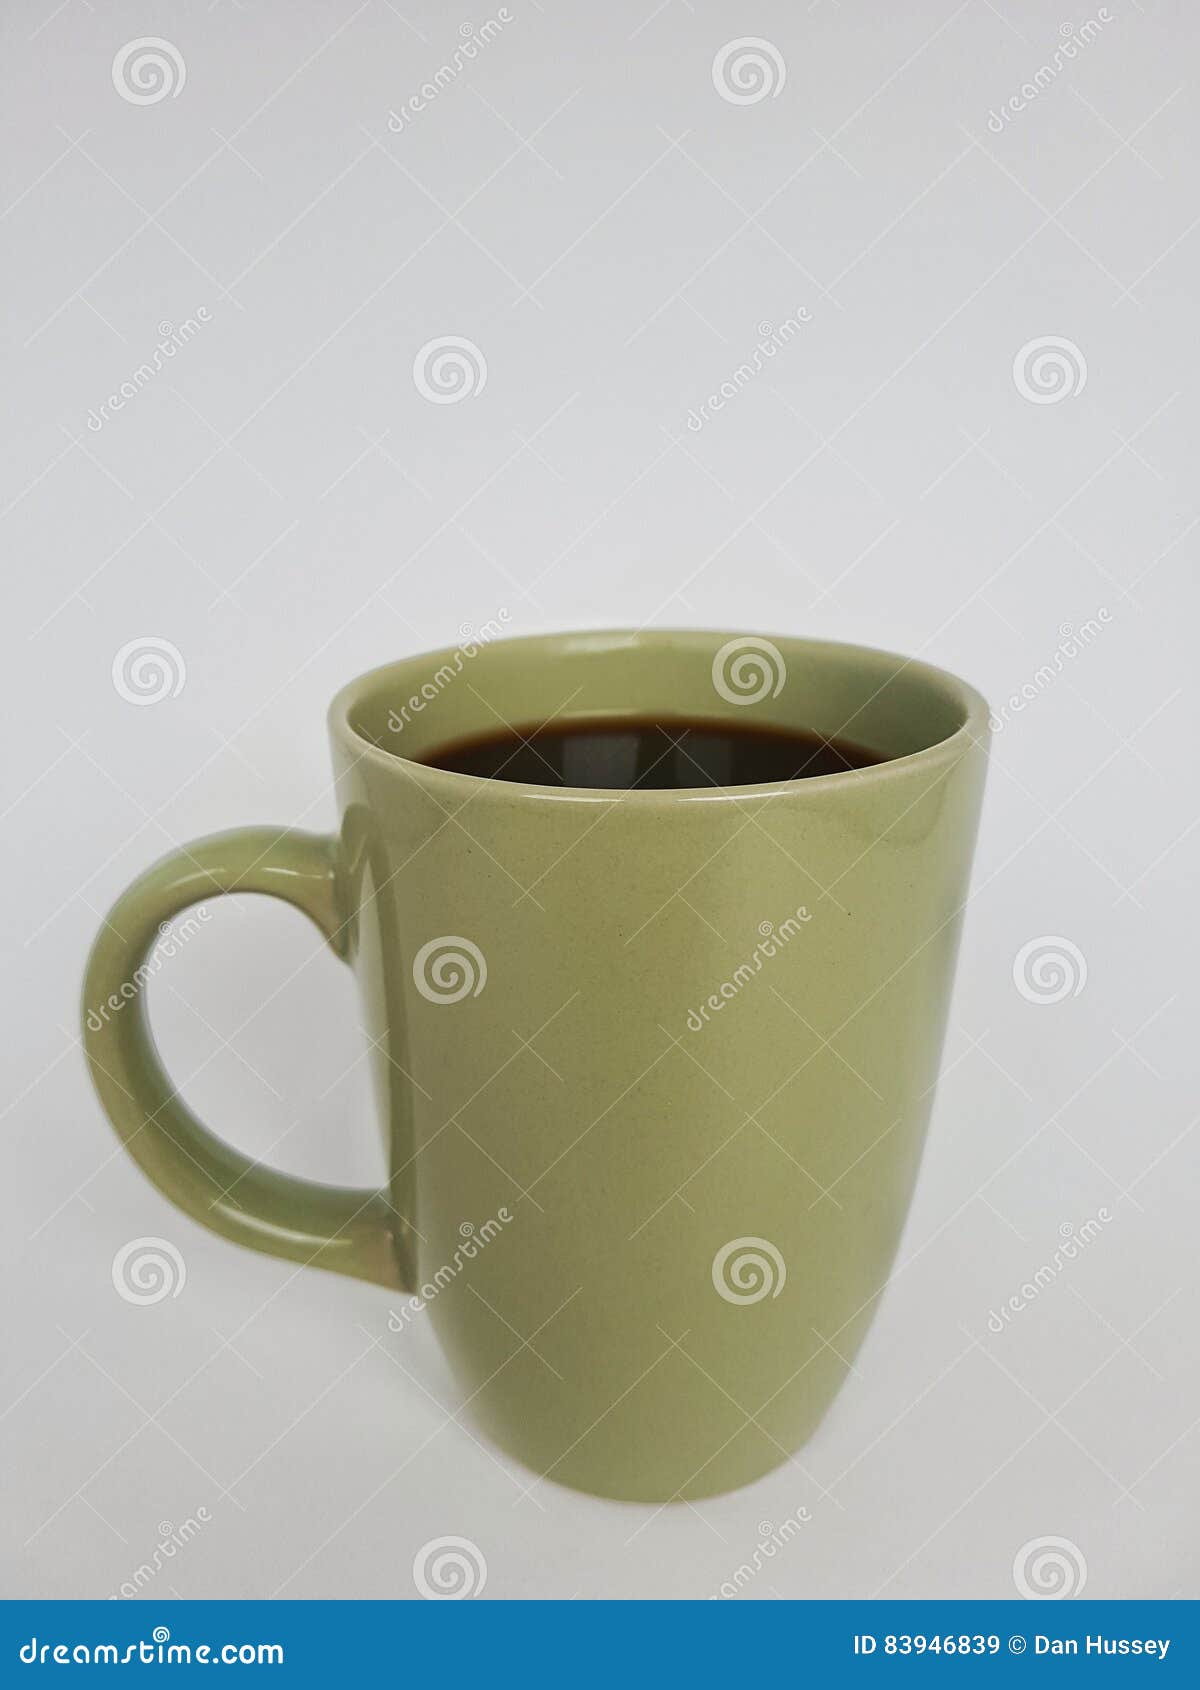 Green Mug Stock Photos and Pictures - 383,273 Images